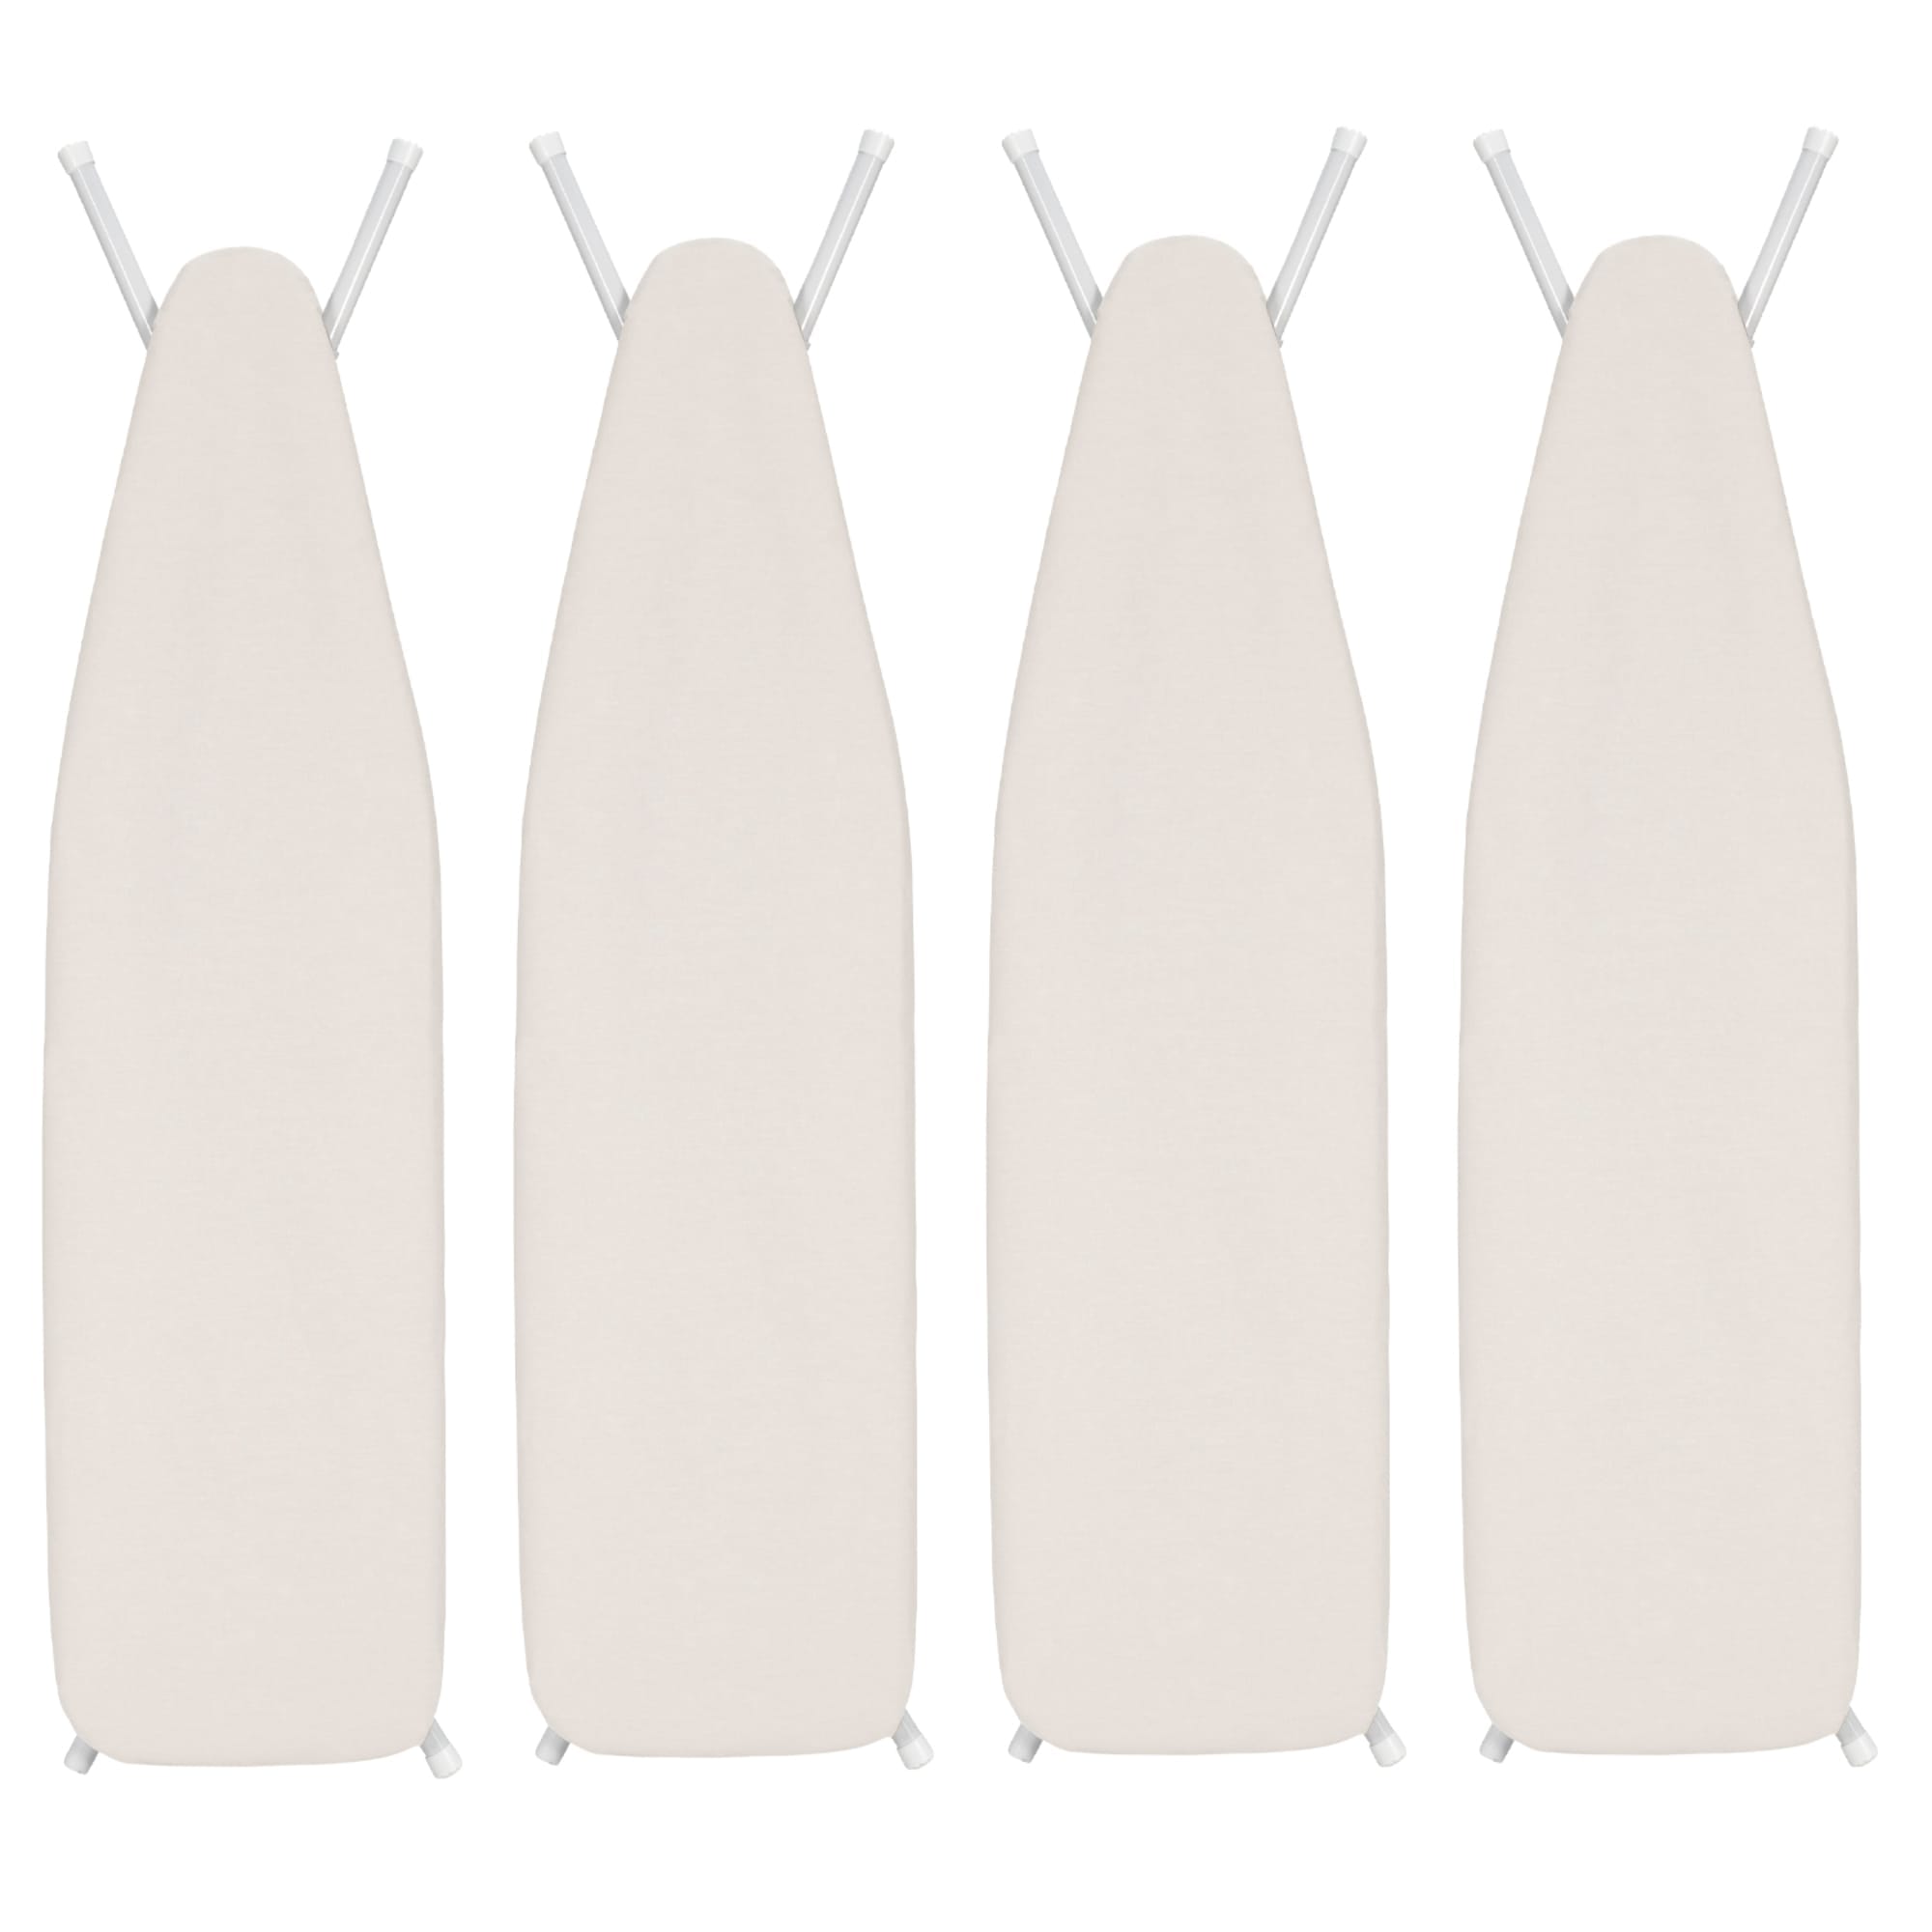 Seymour Home Products Adjustable Height, 4-Leg Ironing Board With Perforated Top, Beige (4 Pack) $30.00 EACH, CASE PACK OF 4